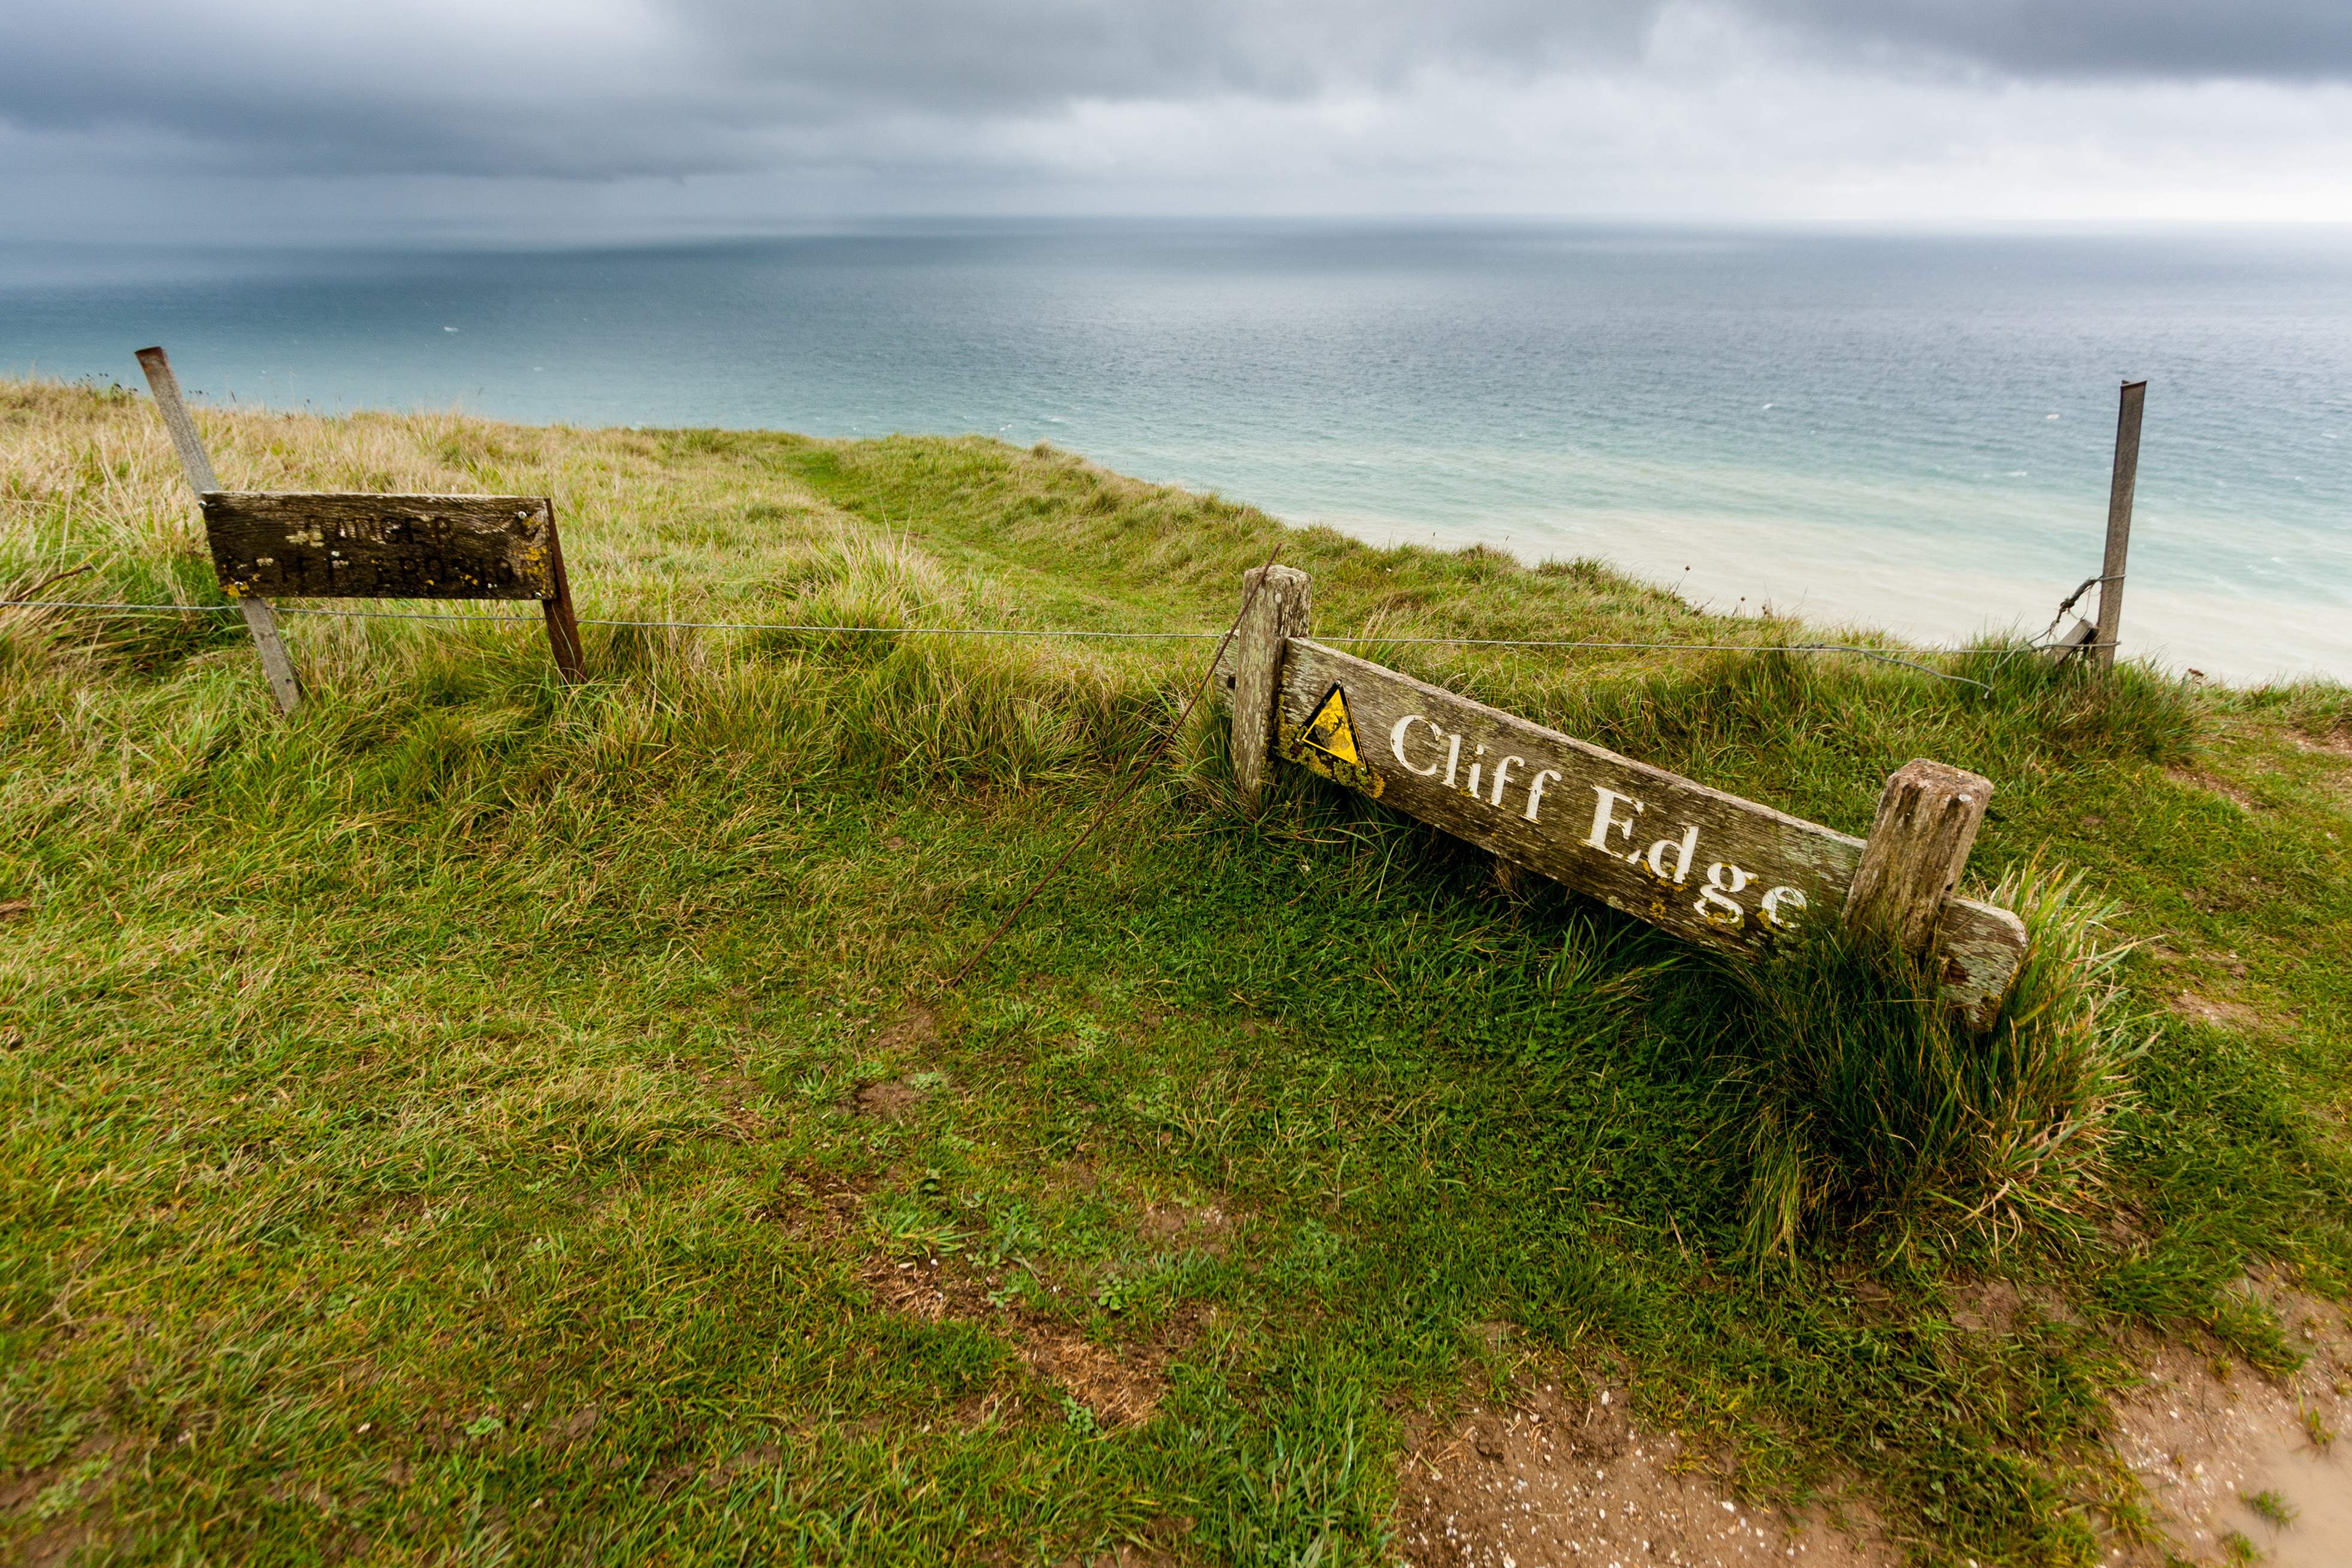 Cliff Edge at the Seven Sisters Walk, East Sussex, England, UK